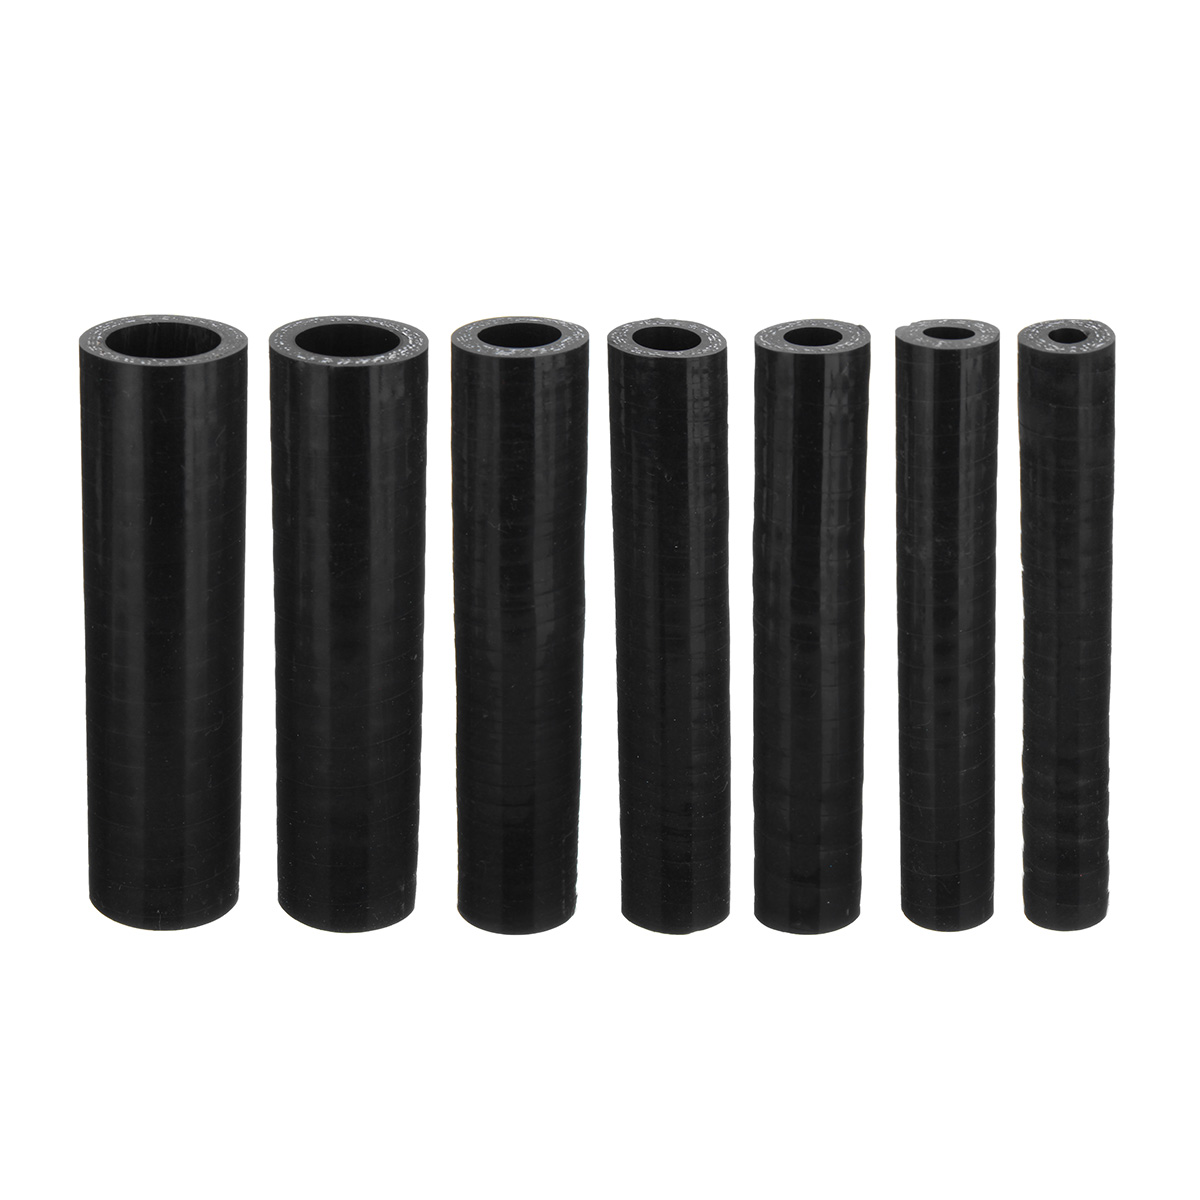 100mm Black Straight Silicone Hose Coupling Connector Silicon Rubber Tube Joiner Pipe Ash